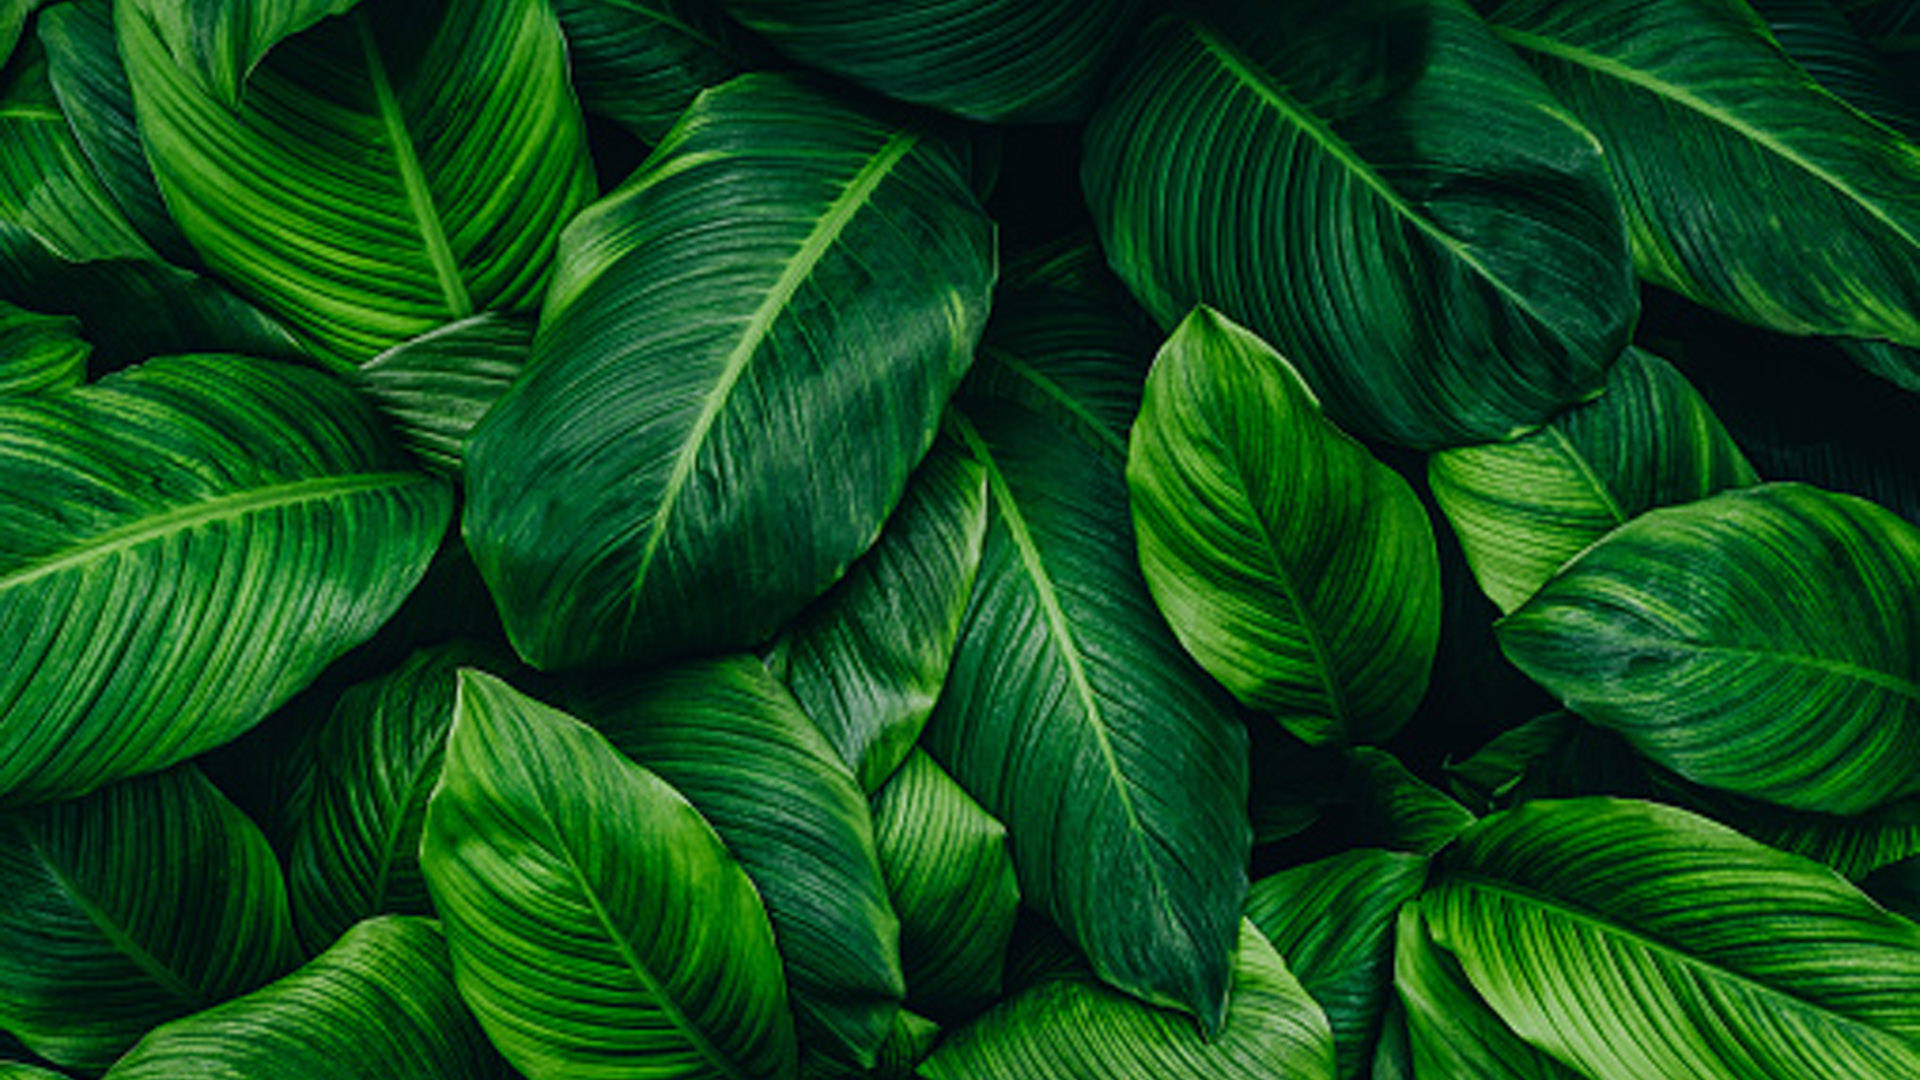 Textured Peace Lily Leaves Green Plants Wallpaper